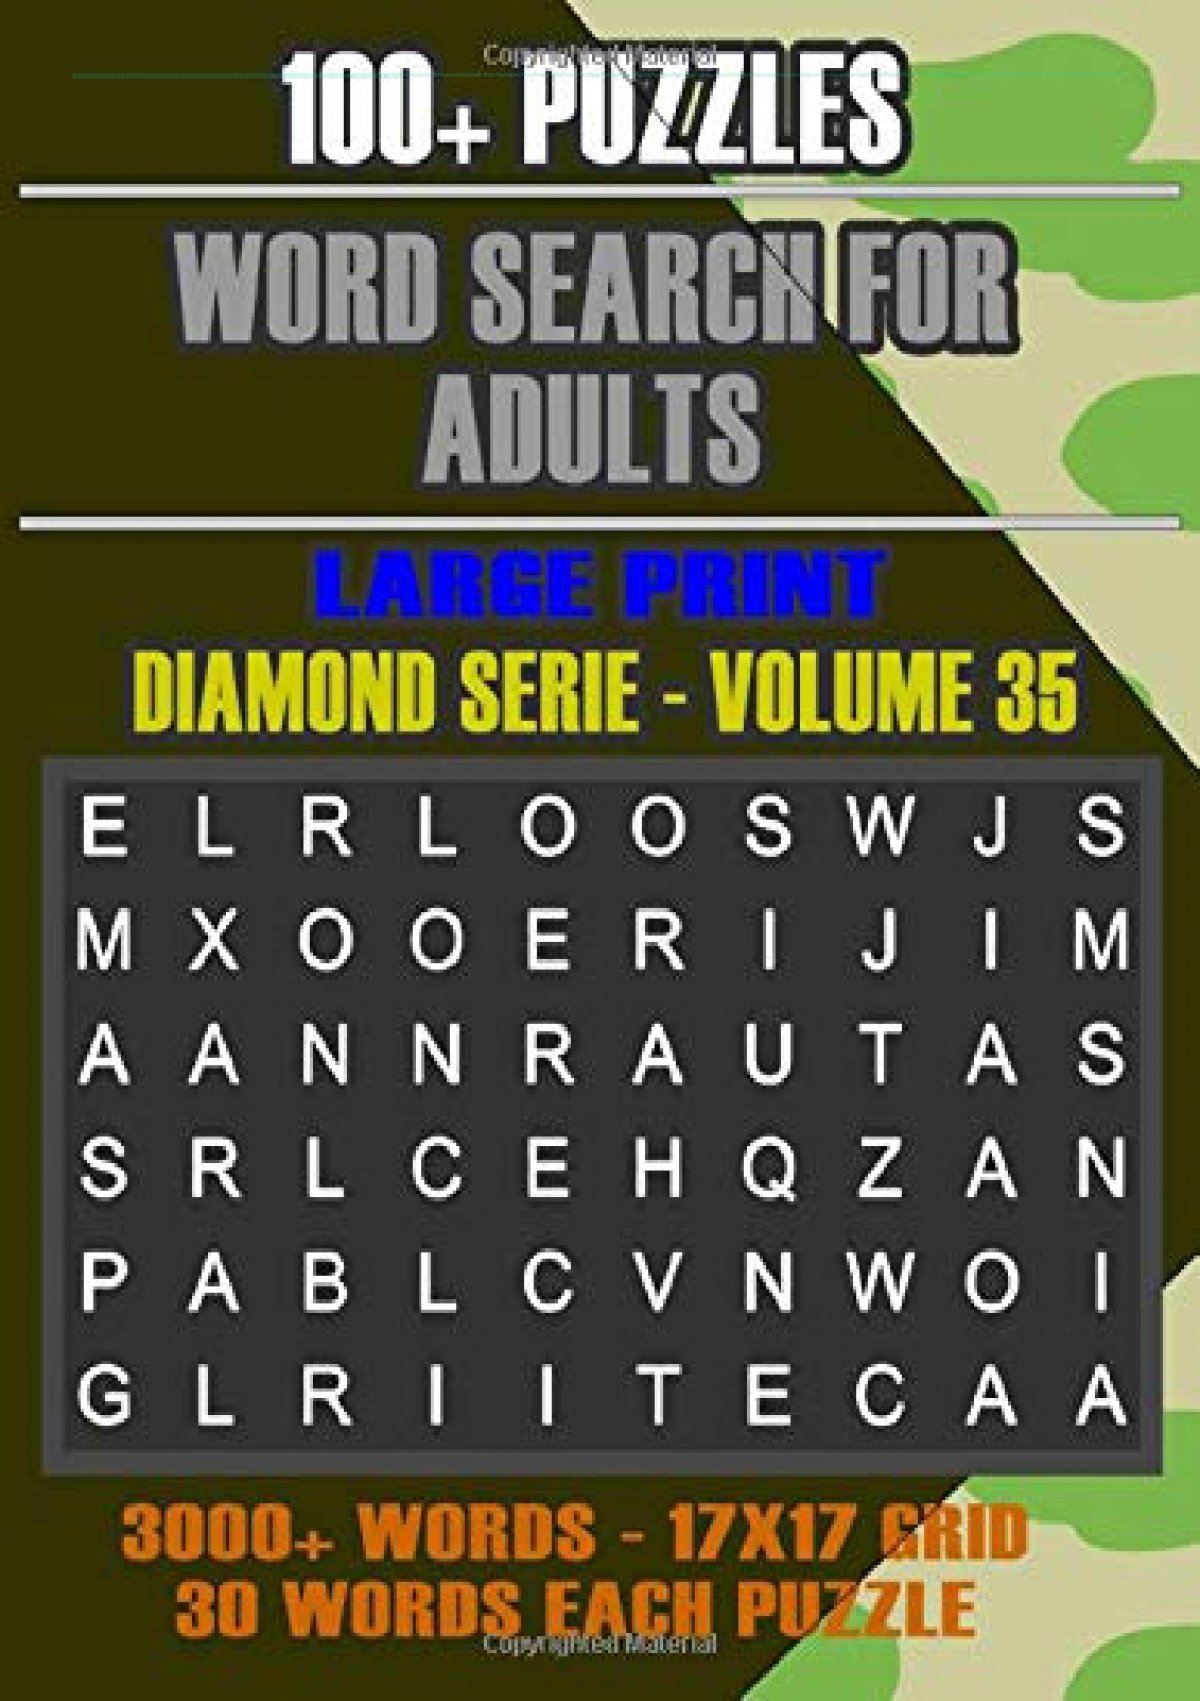 pdf-word-search-for-adults-more-games-for-adults-large-letter-high-definition-select-words